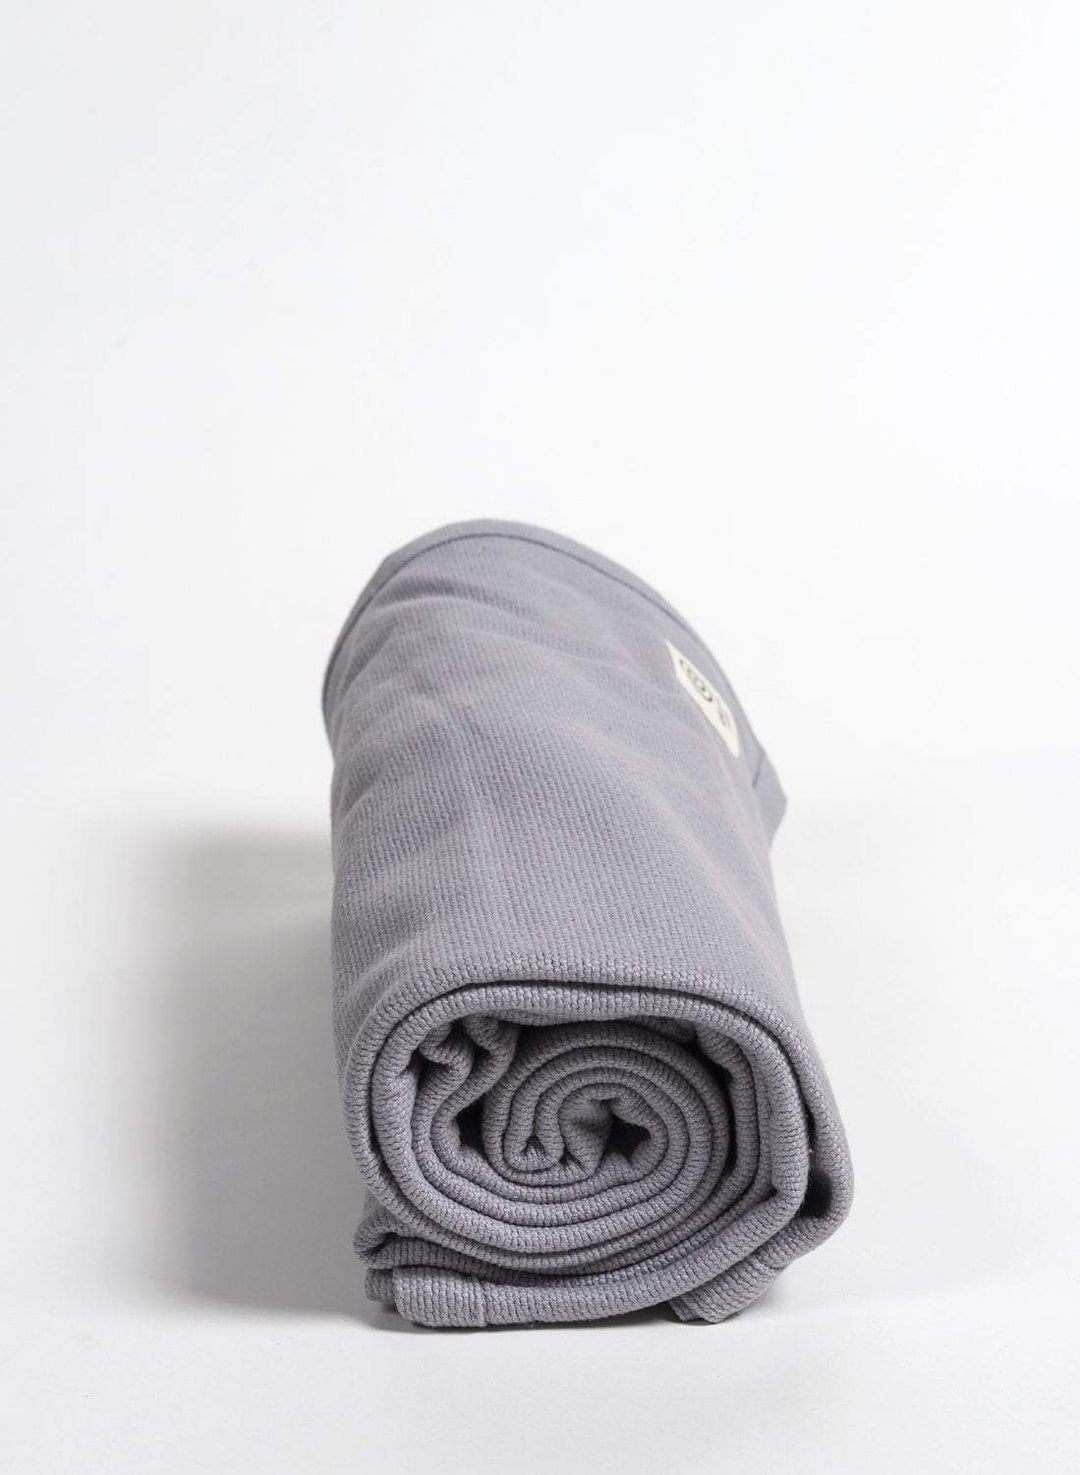 Authentic Thick Yoga Blanket - Microfiber Yoga Blanket Soft Woven Polyamide  & Polyester Blanket in Solid Grey, Perfect for Yoga Rug, Beach and  Meditation Blanket - China Manduka Yoga Blanket and Yoga Blanket price